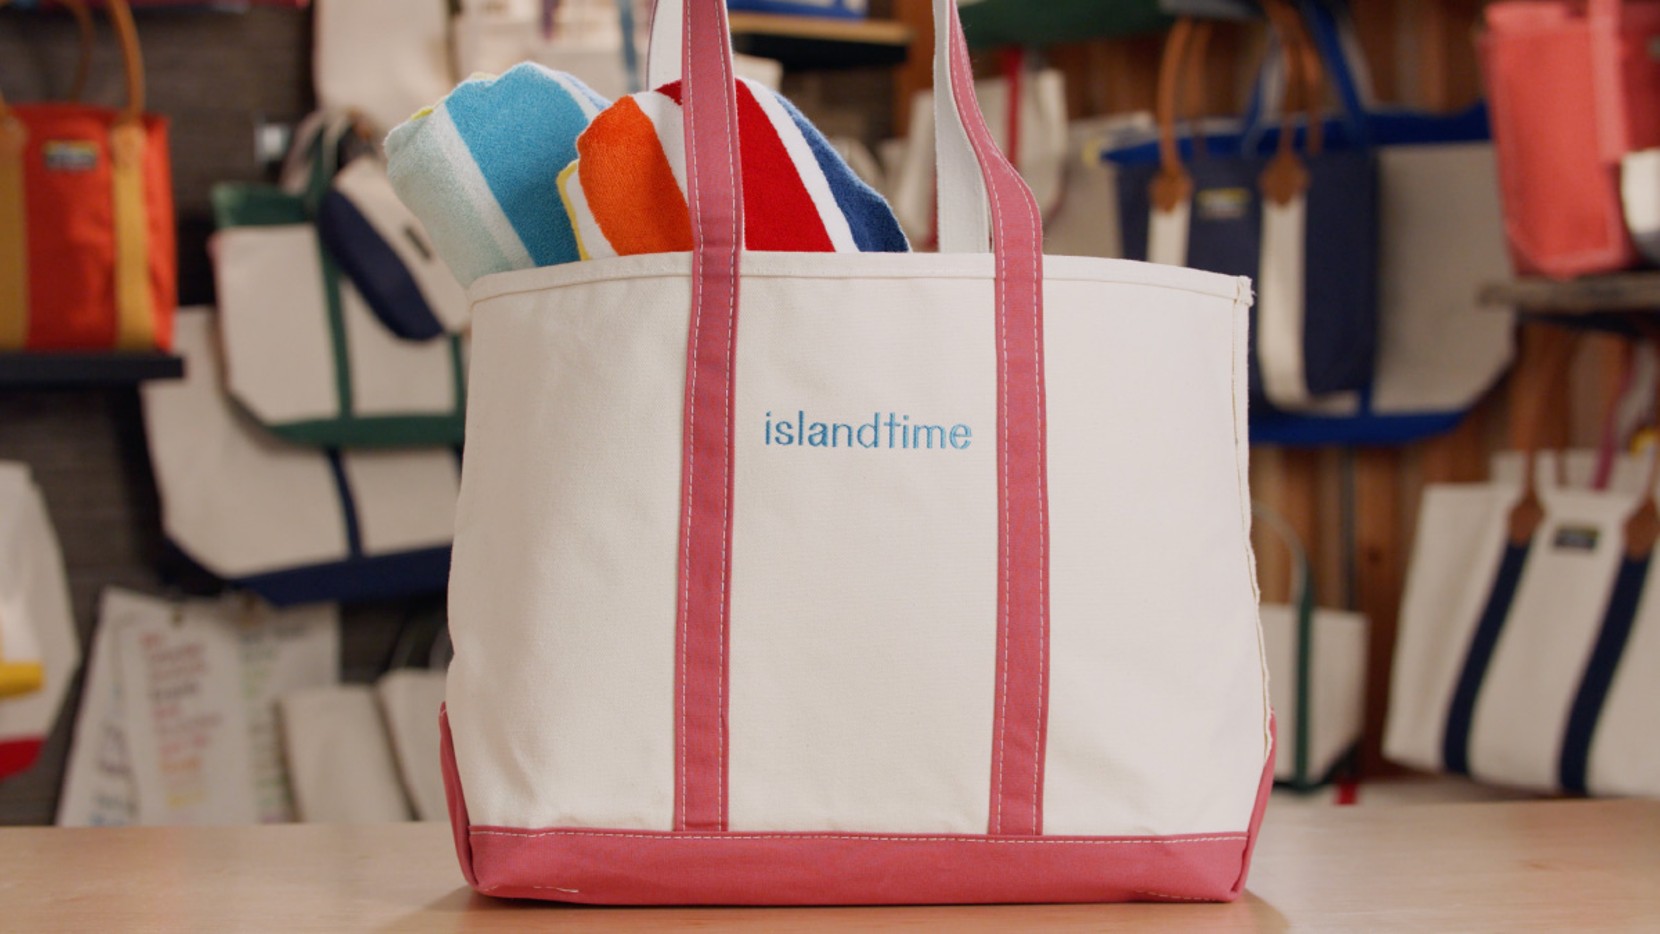 A large Boat & Tote with red handles and light blue monogram - "islandtime", filled with towels and beach toys.